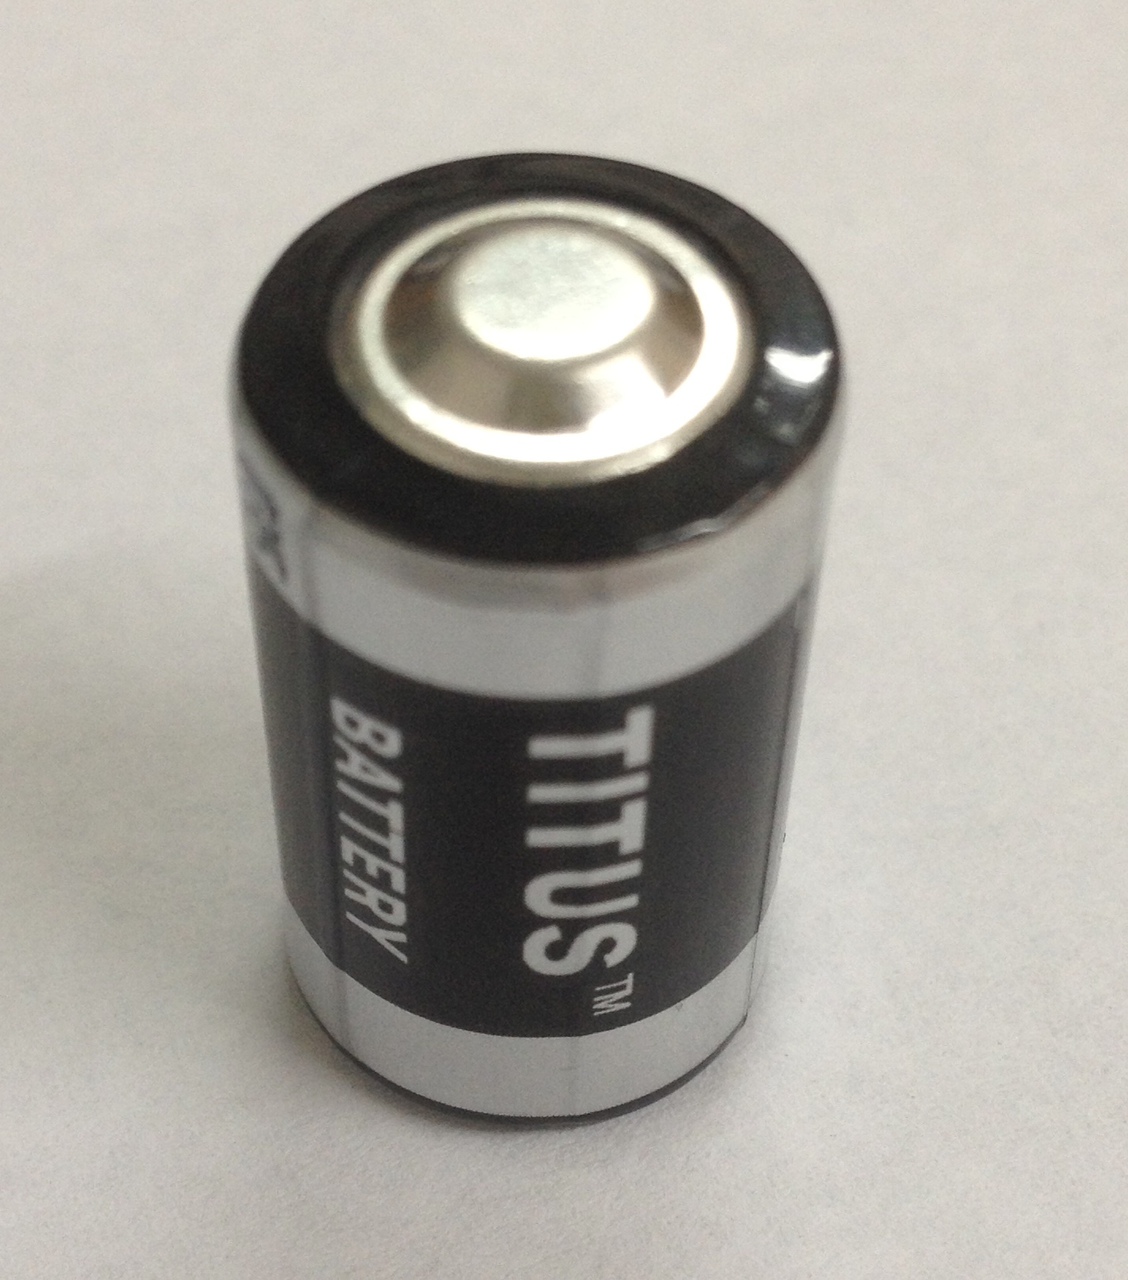 Titus 1/2 AA Size 3.6V ER14250T Lithium Battery With Solder Tabs - 1 Pack + Free Shipping!